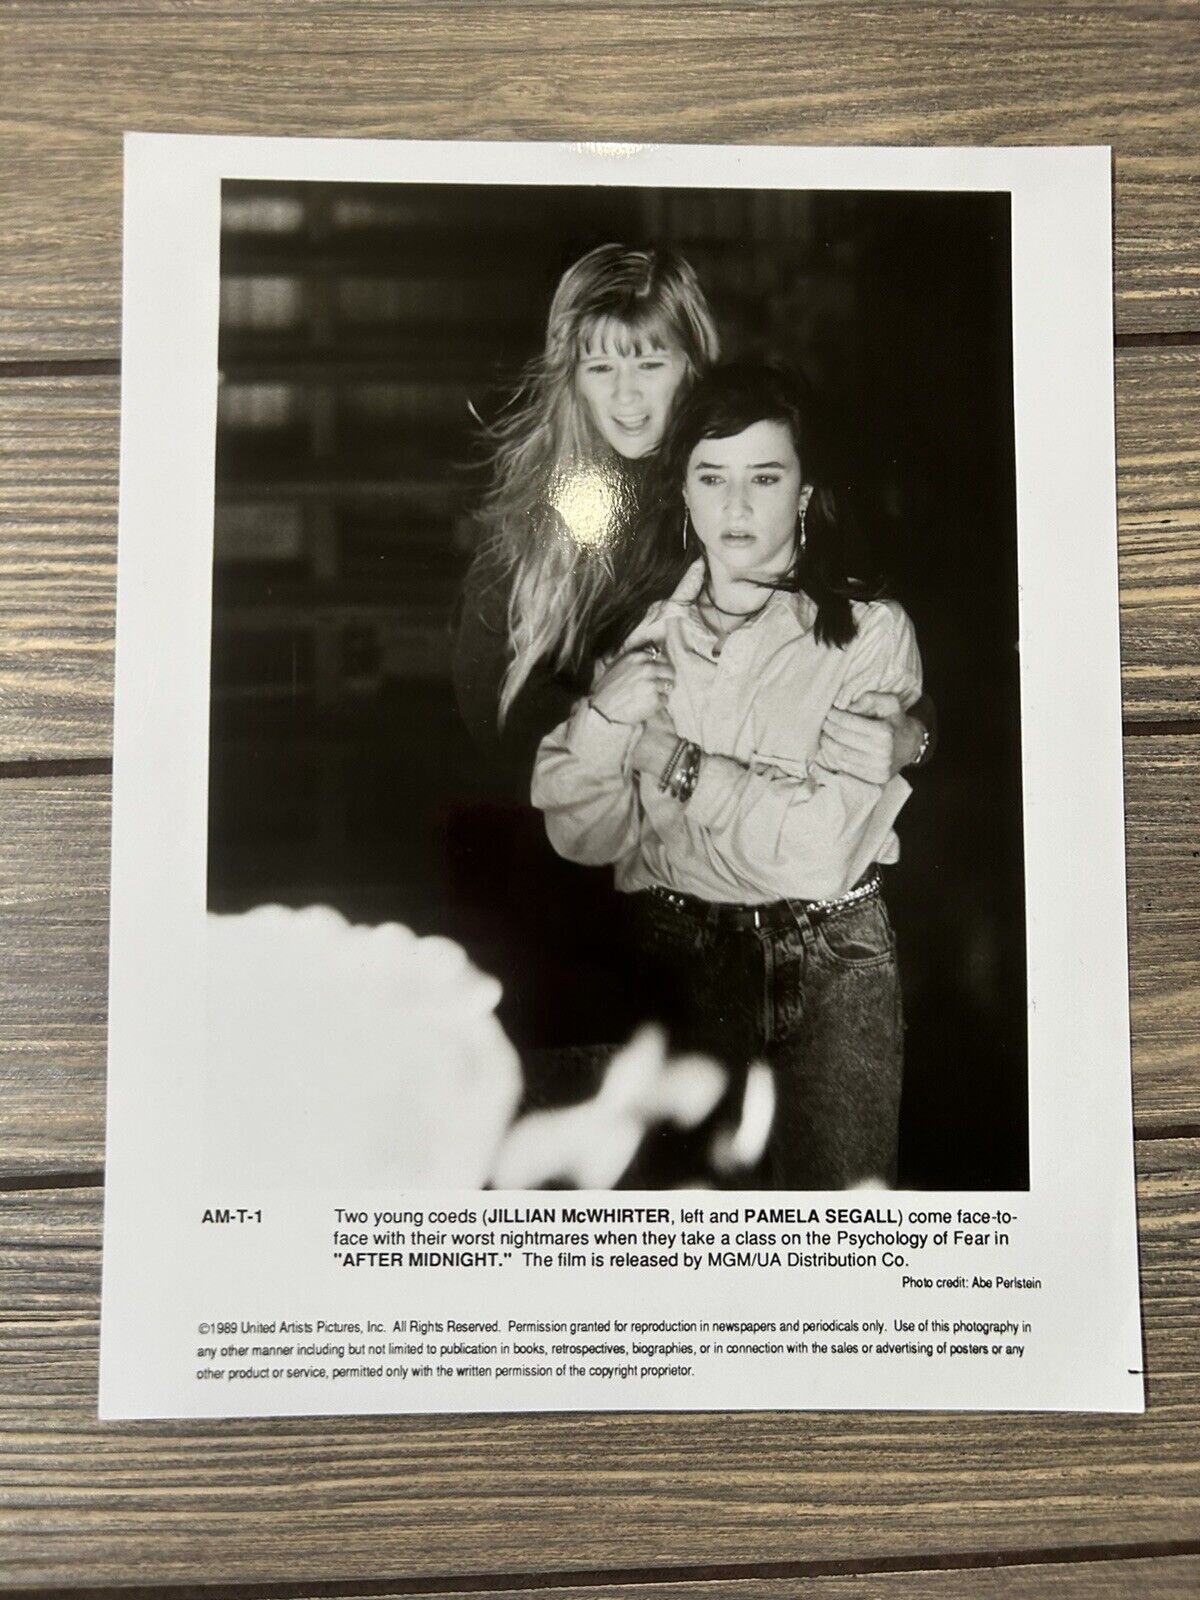 Vintage 1989 After Midnight Press Release Photo 8x10 Black White McWhirther